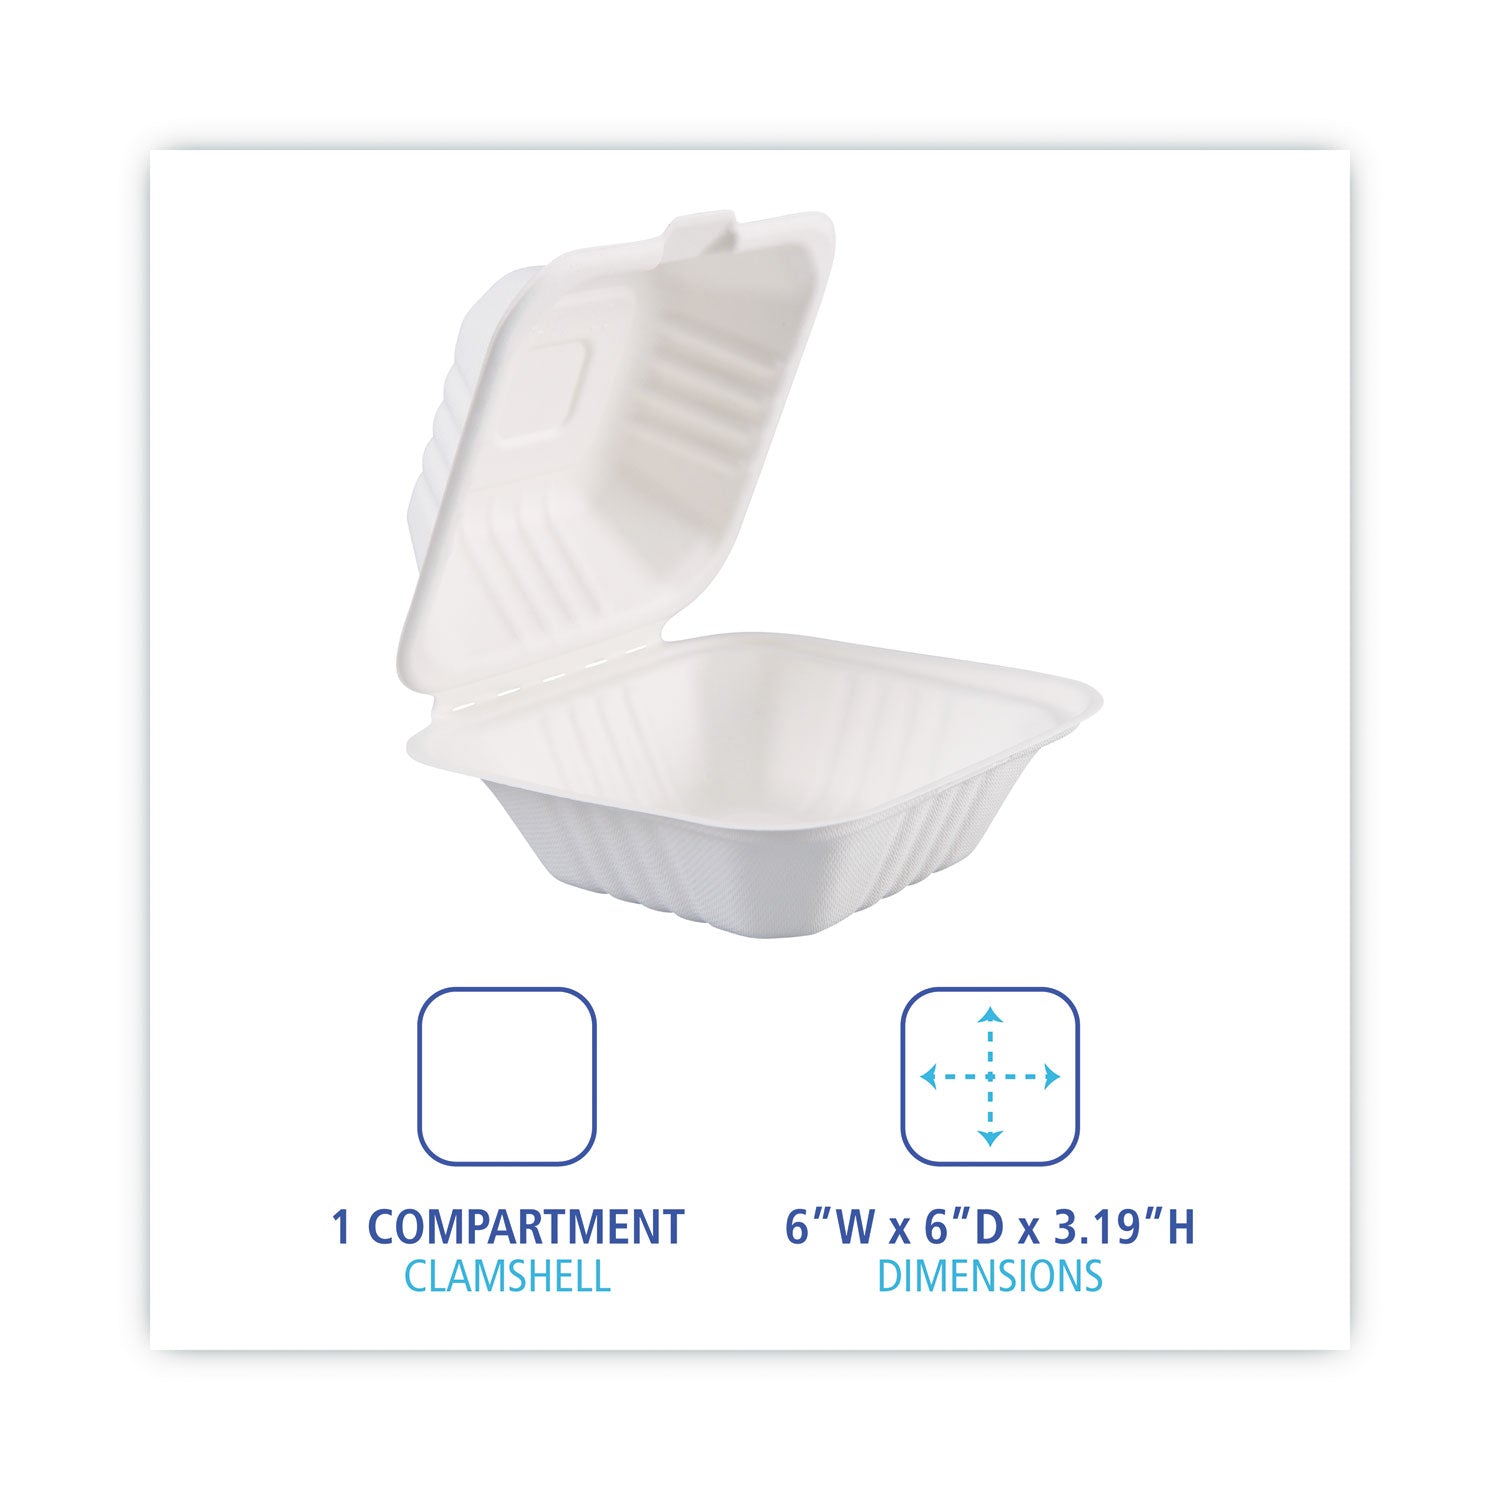 bagasse-food-containers-hinged-lid-1-compartment-6-x-6-x-319-white-sugarcane-125-sleeve-4-sleeves-carton_bwkhingewf1cm6 - 4